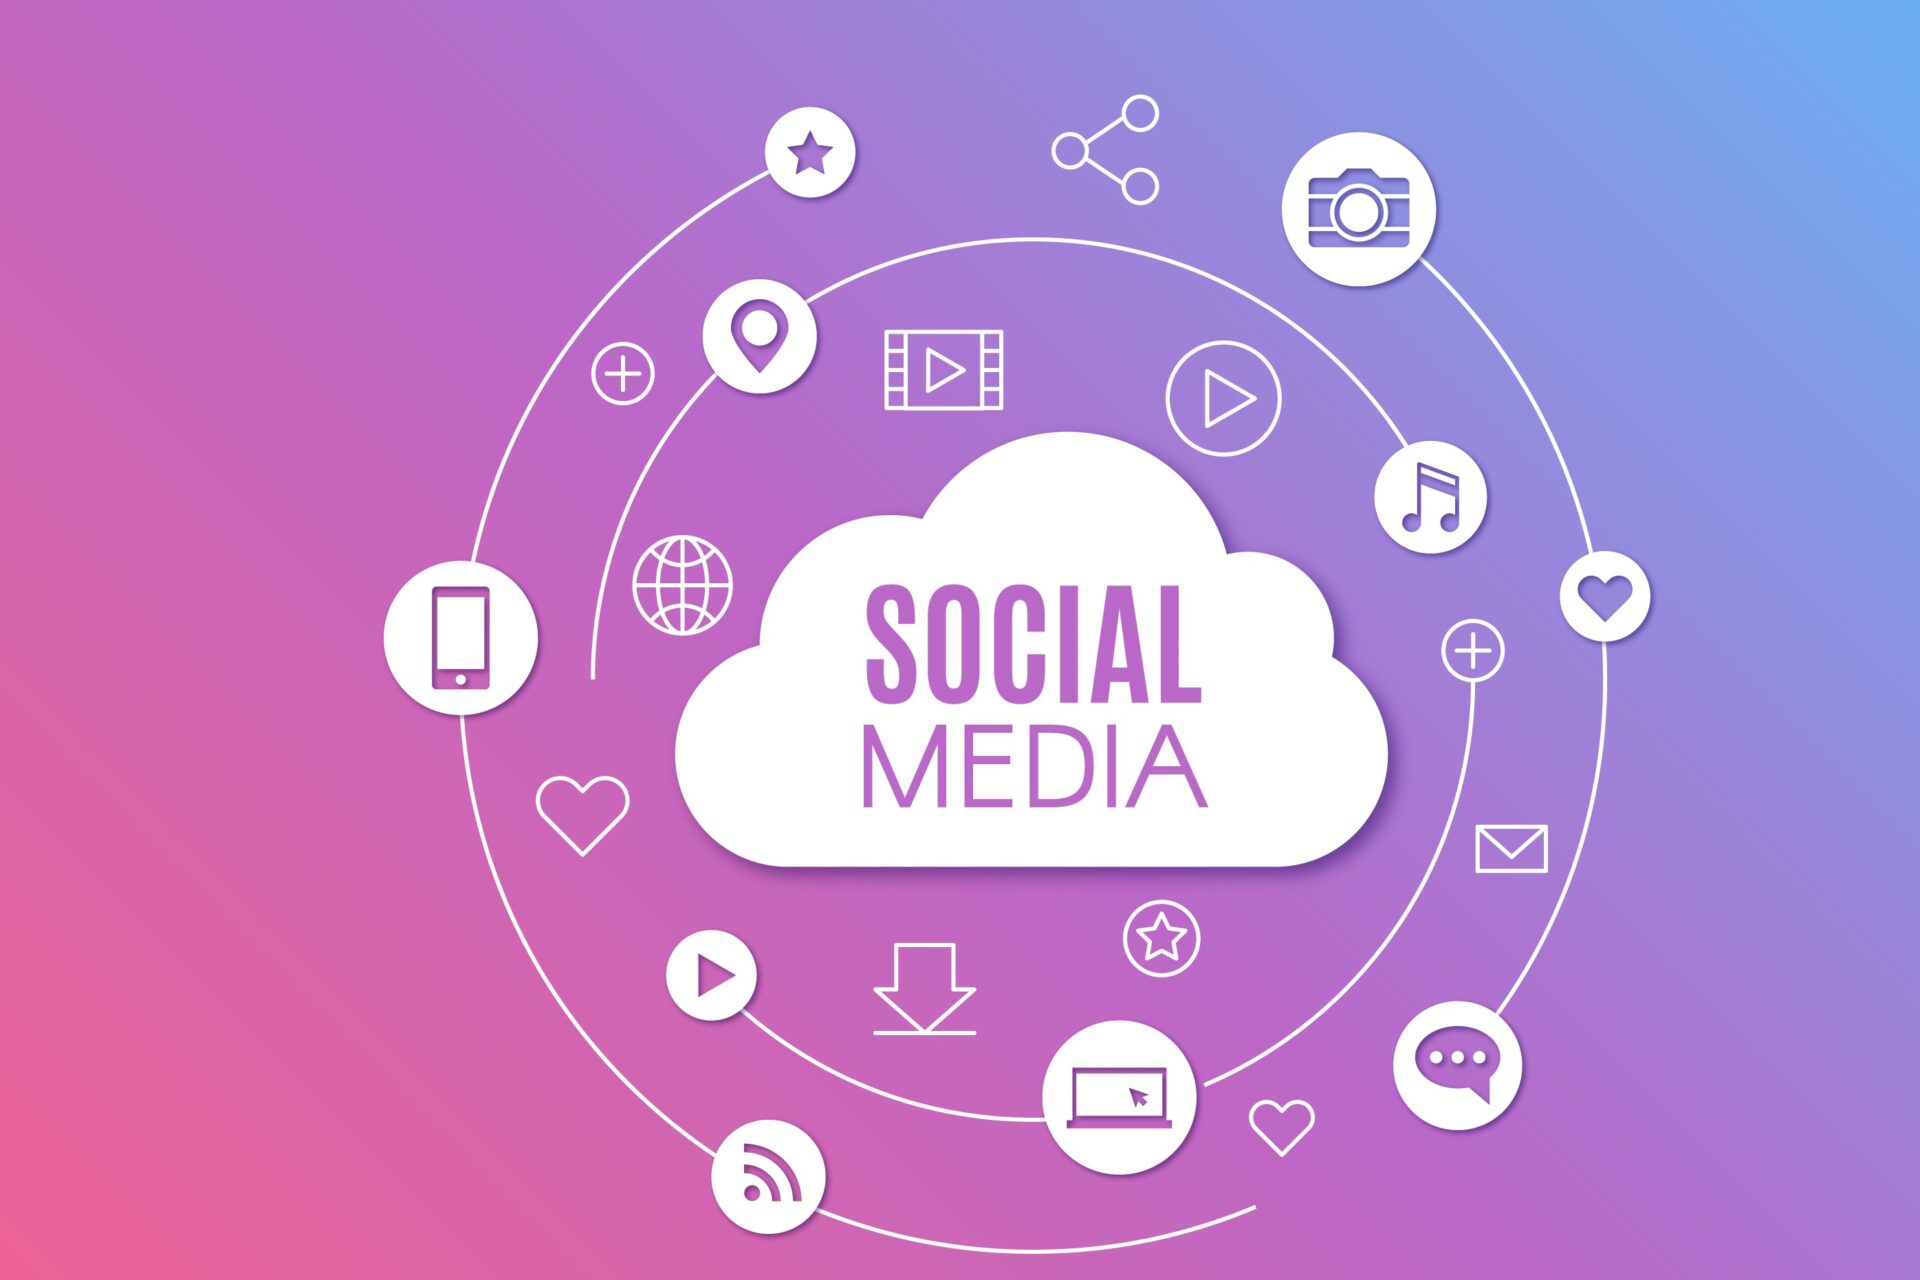 10 Social Media Trends That Will Matter Most in 2019 - SMM